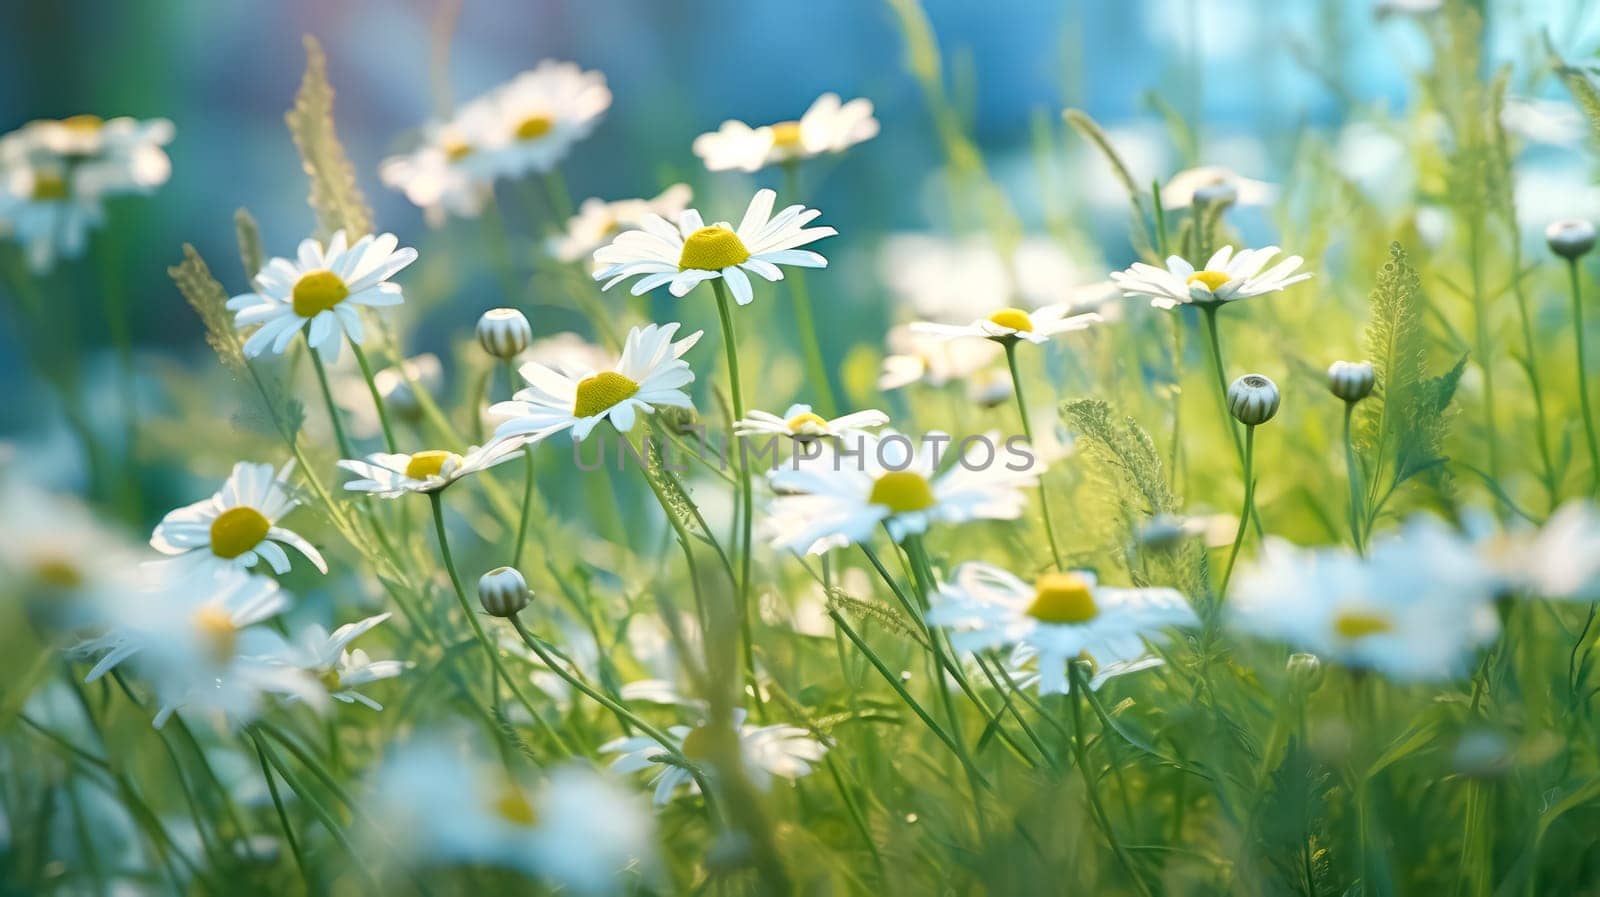 Daisies bloom in a sun drenched spring meadow. by Alla_Morozova93